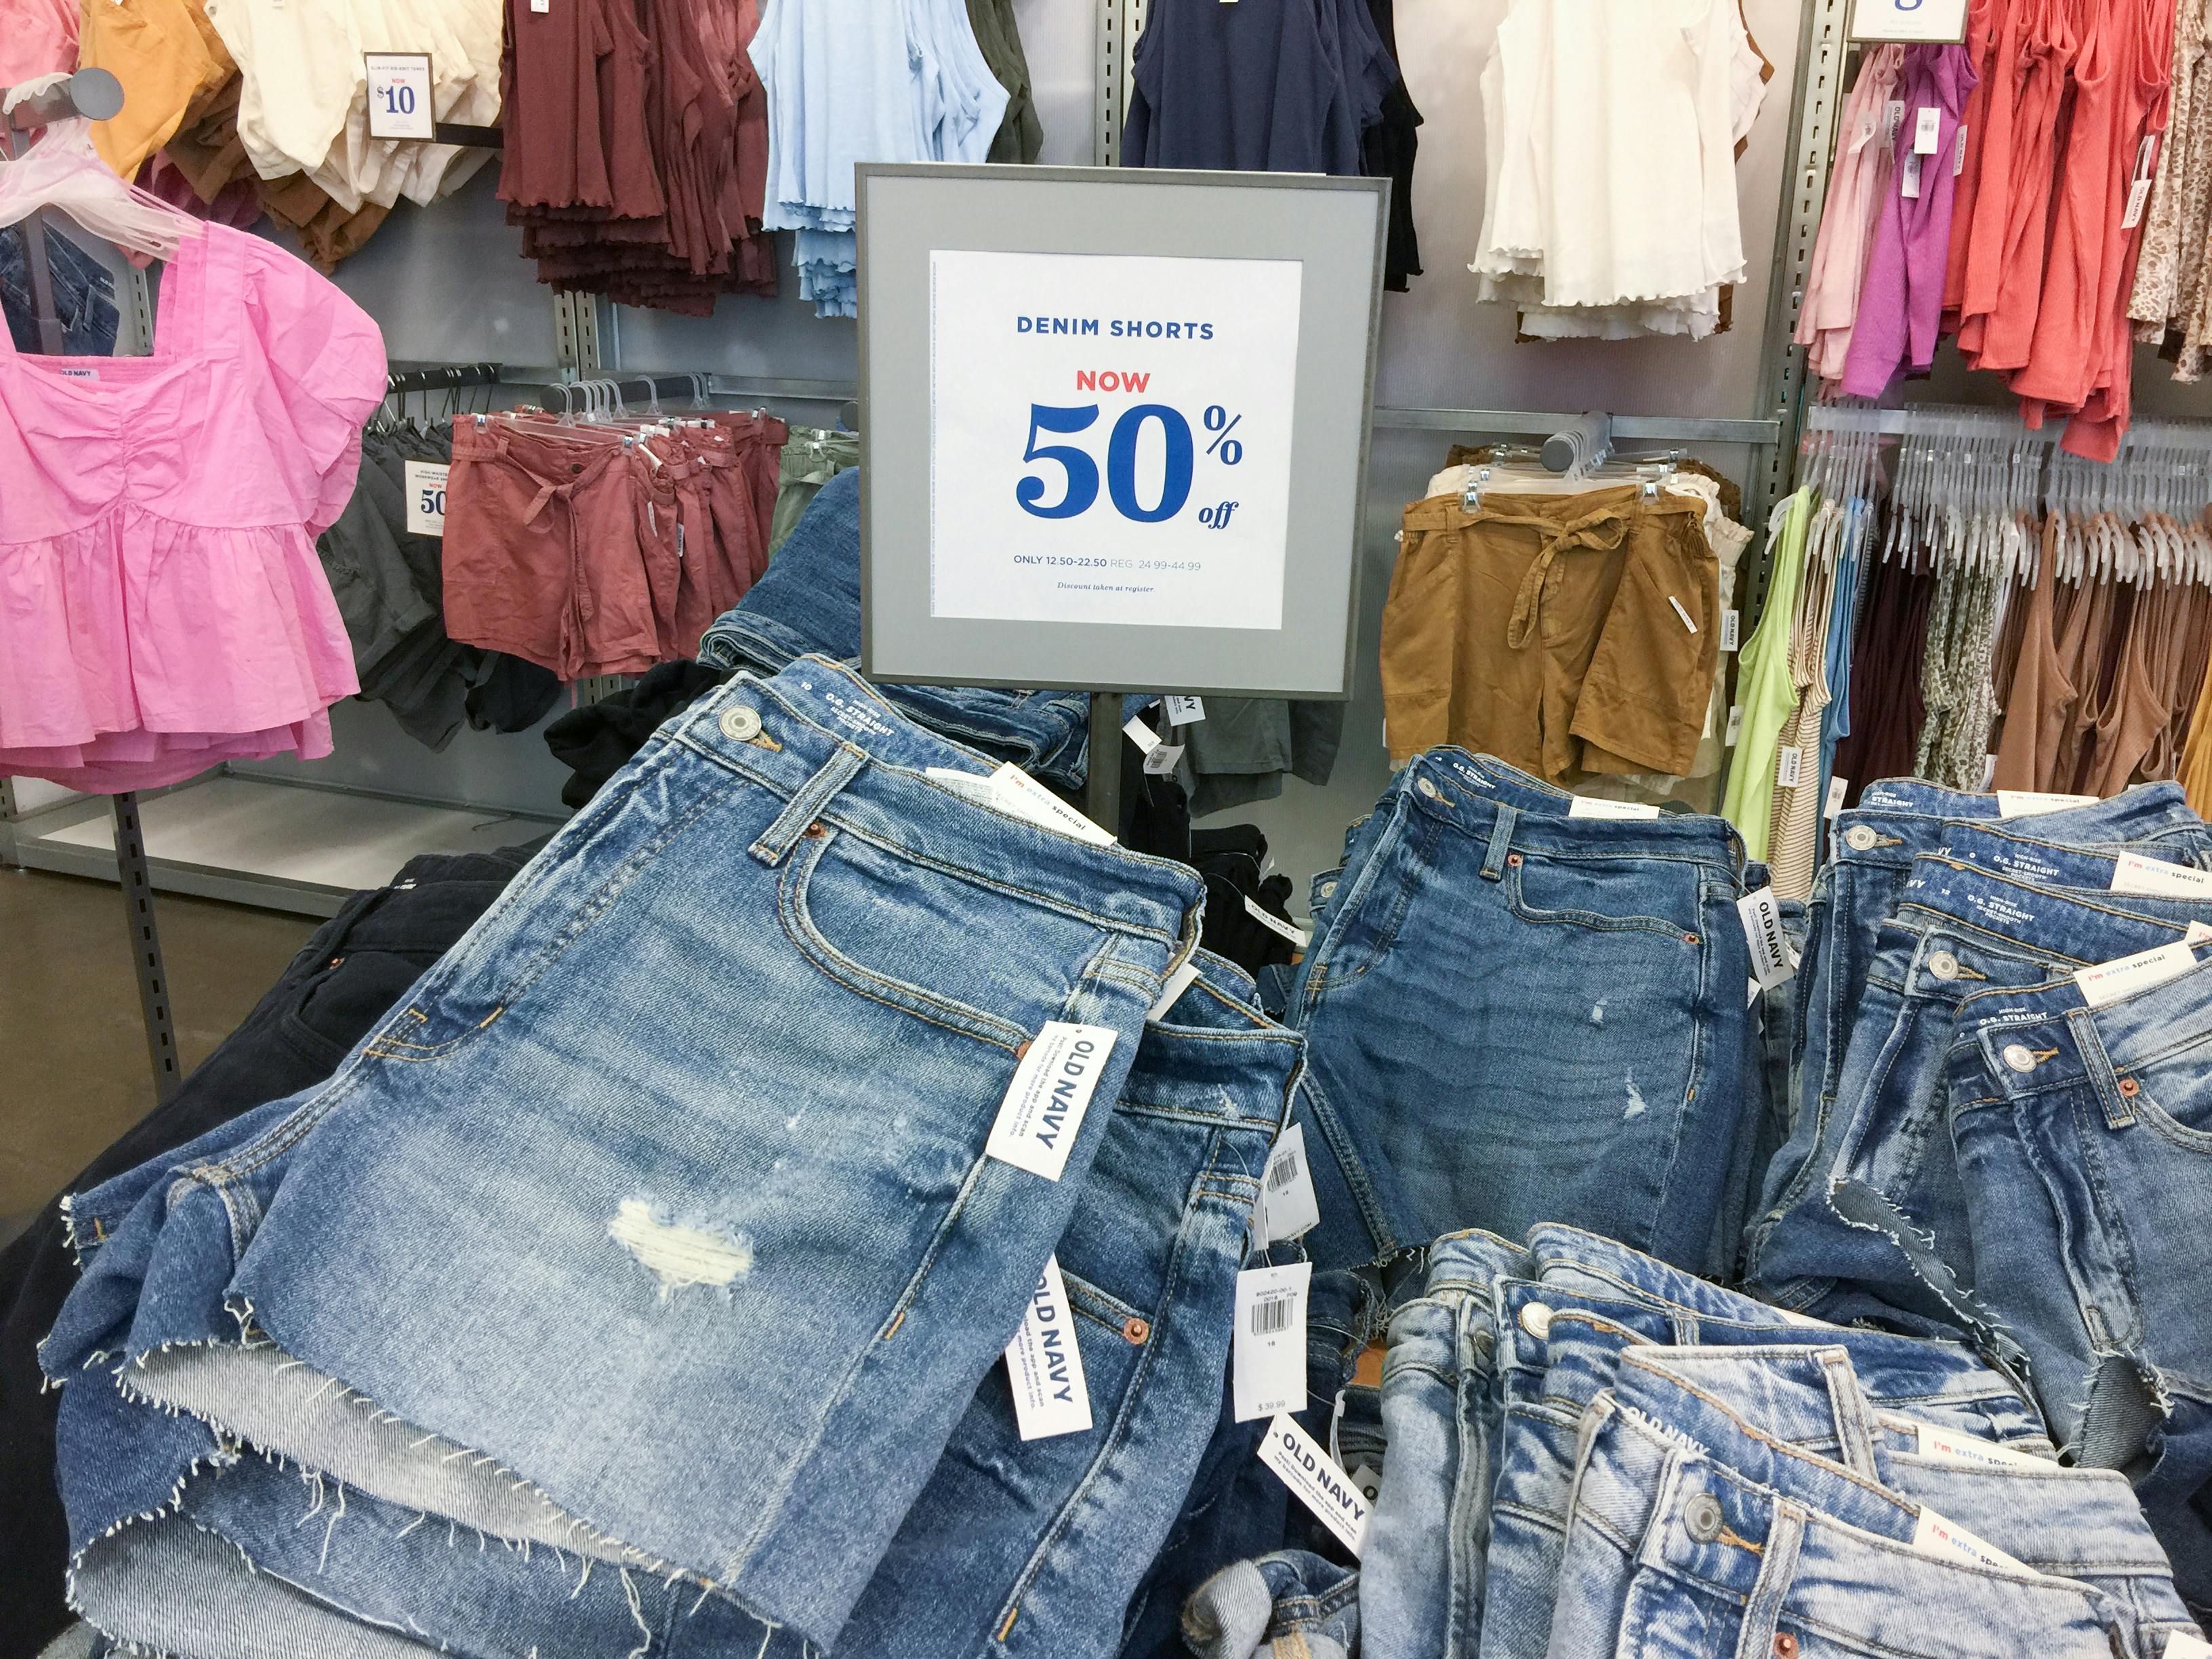 A table of denim shorts inside Old Navy, with a sign that reads, "Denim shorts, now 50% off